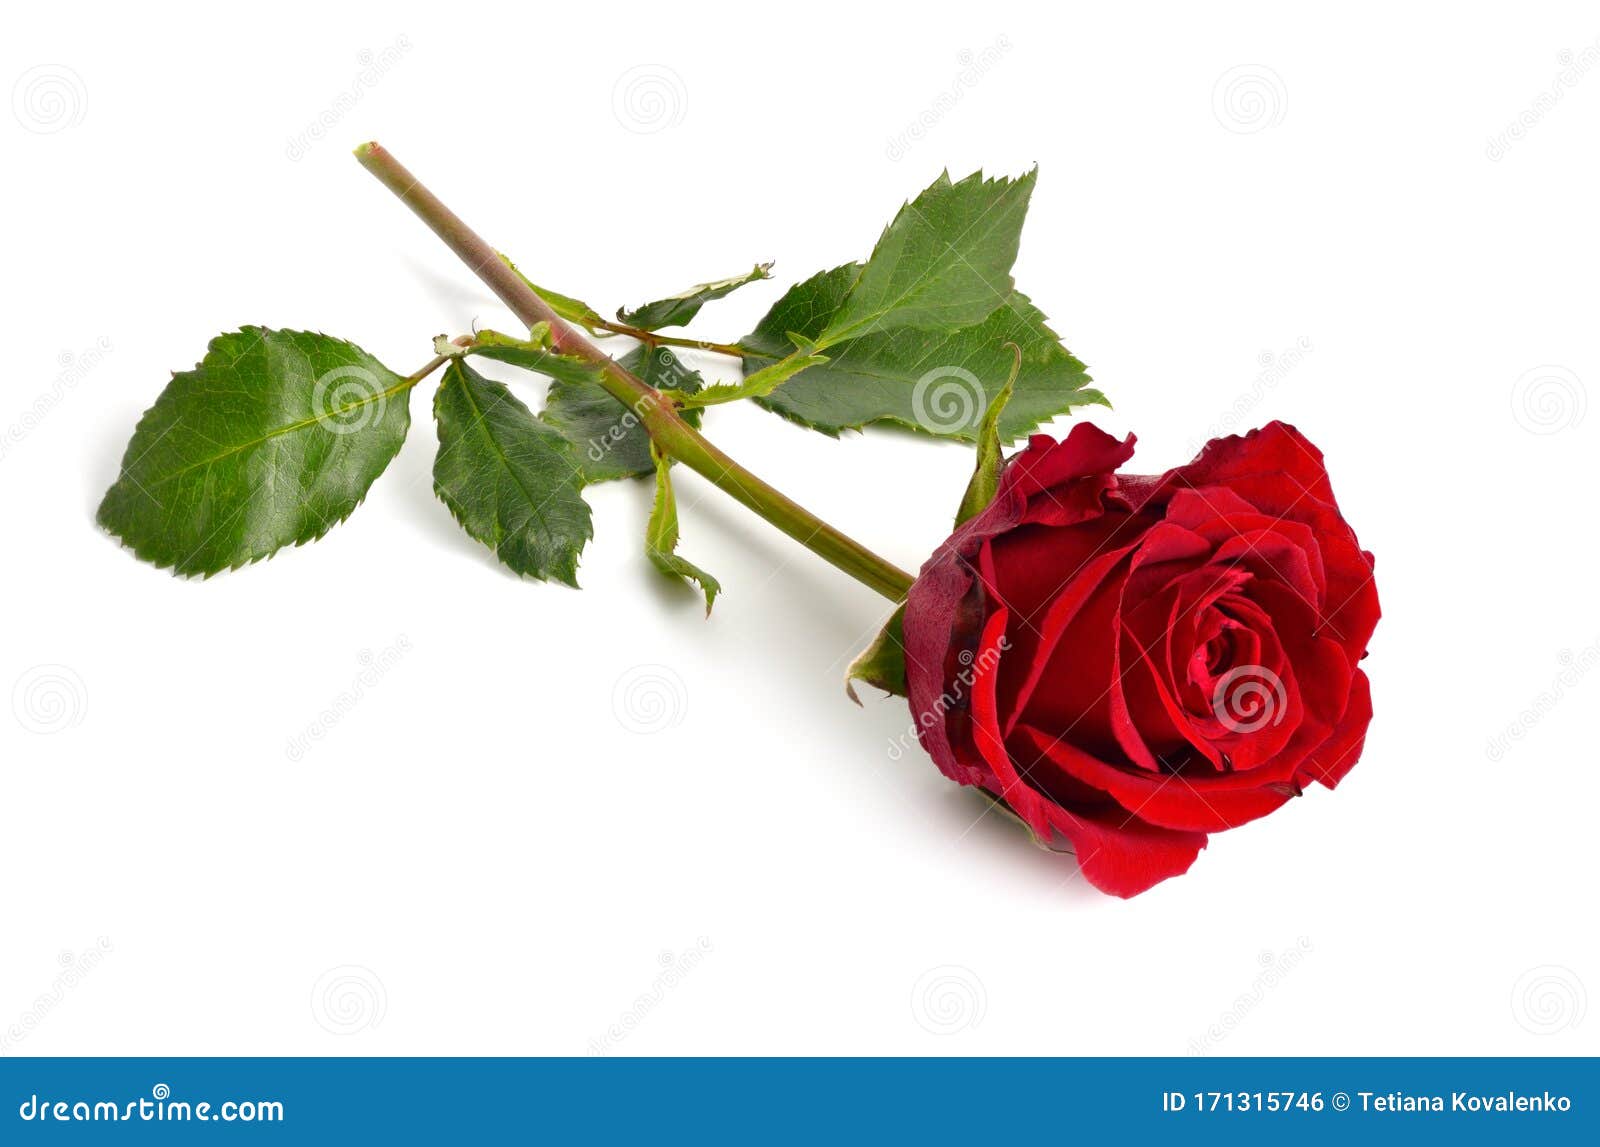 one red rose  on white background. full dept of field